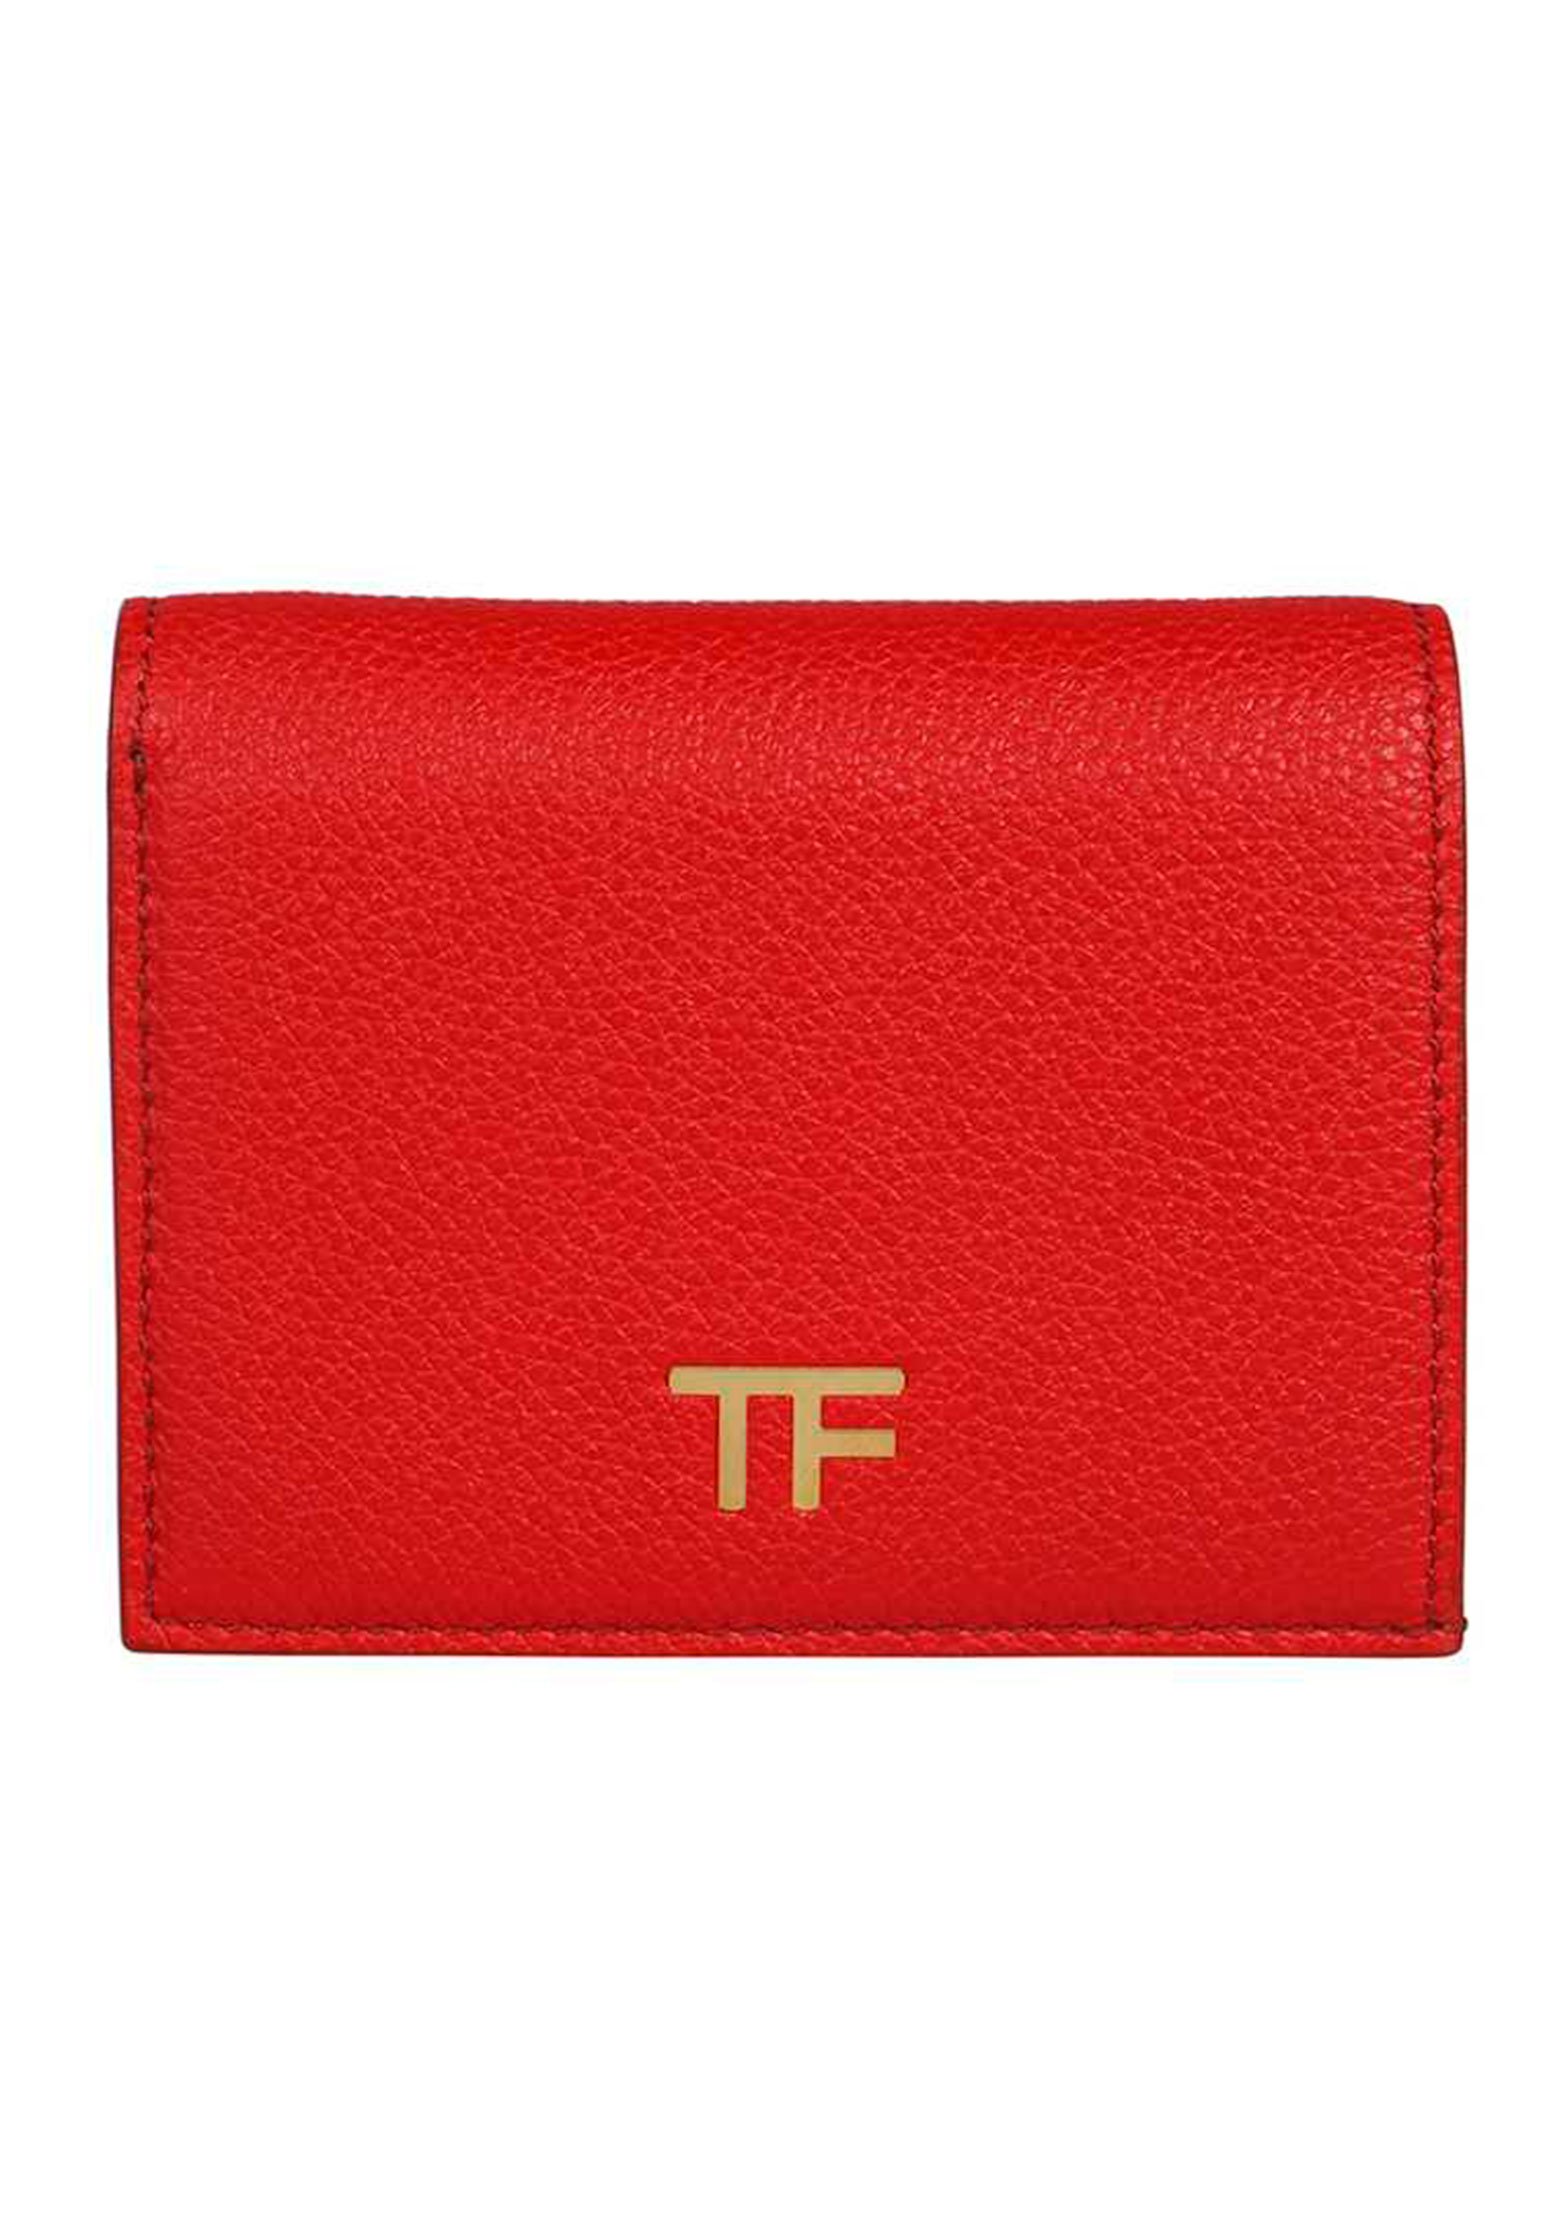 Mini wallet TOM FORD Color: red (Code: 1096) in online store Allure